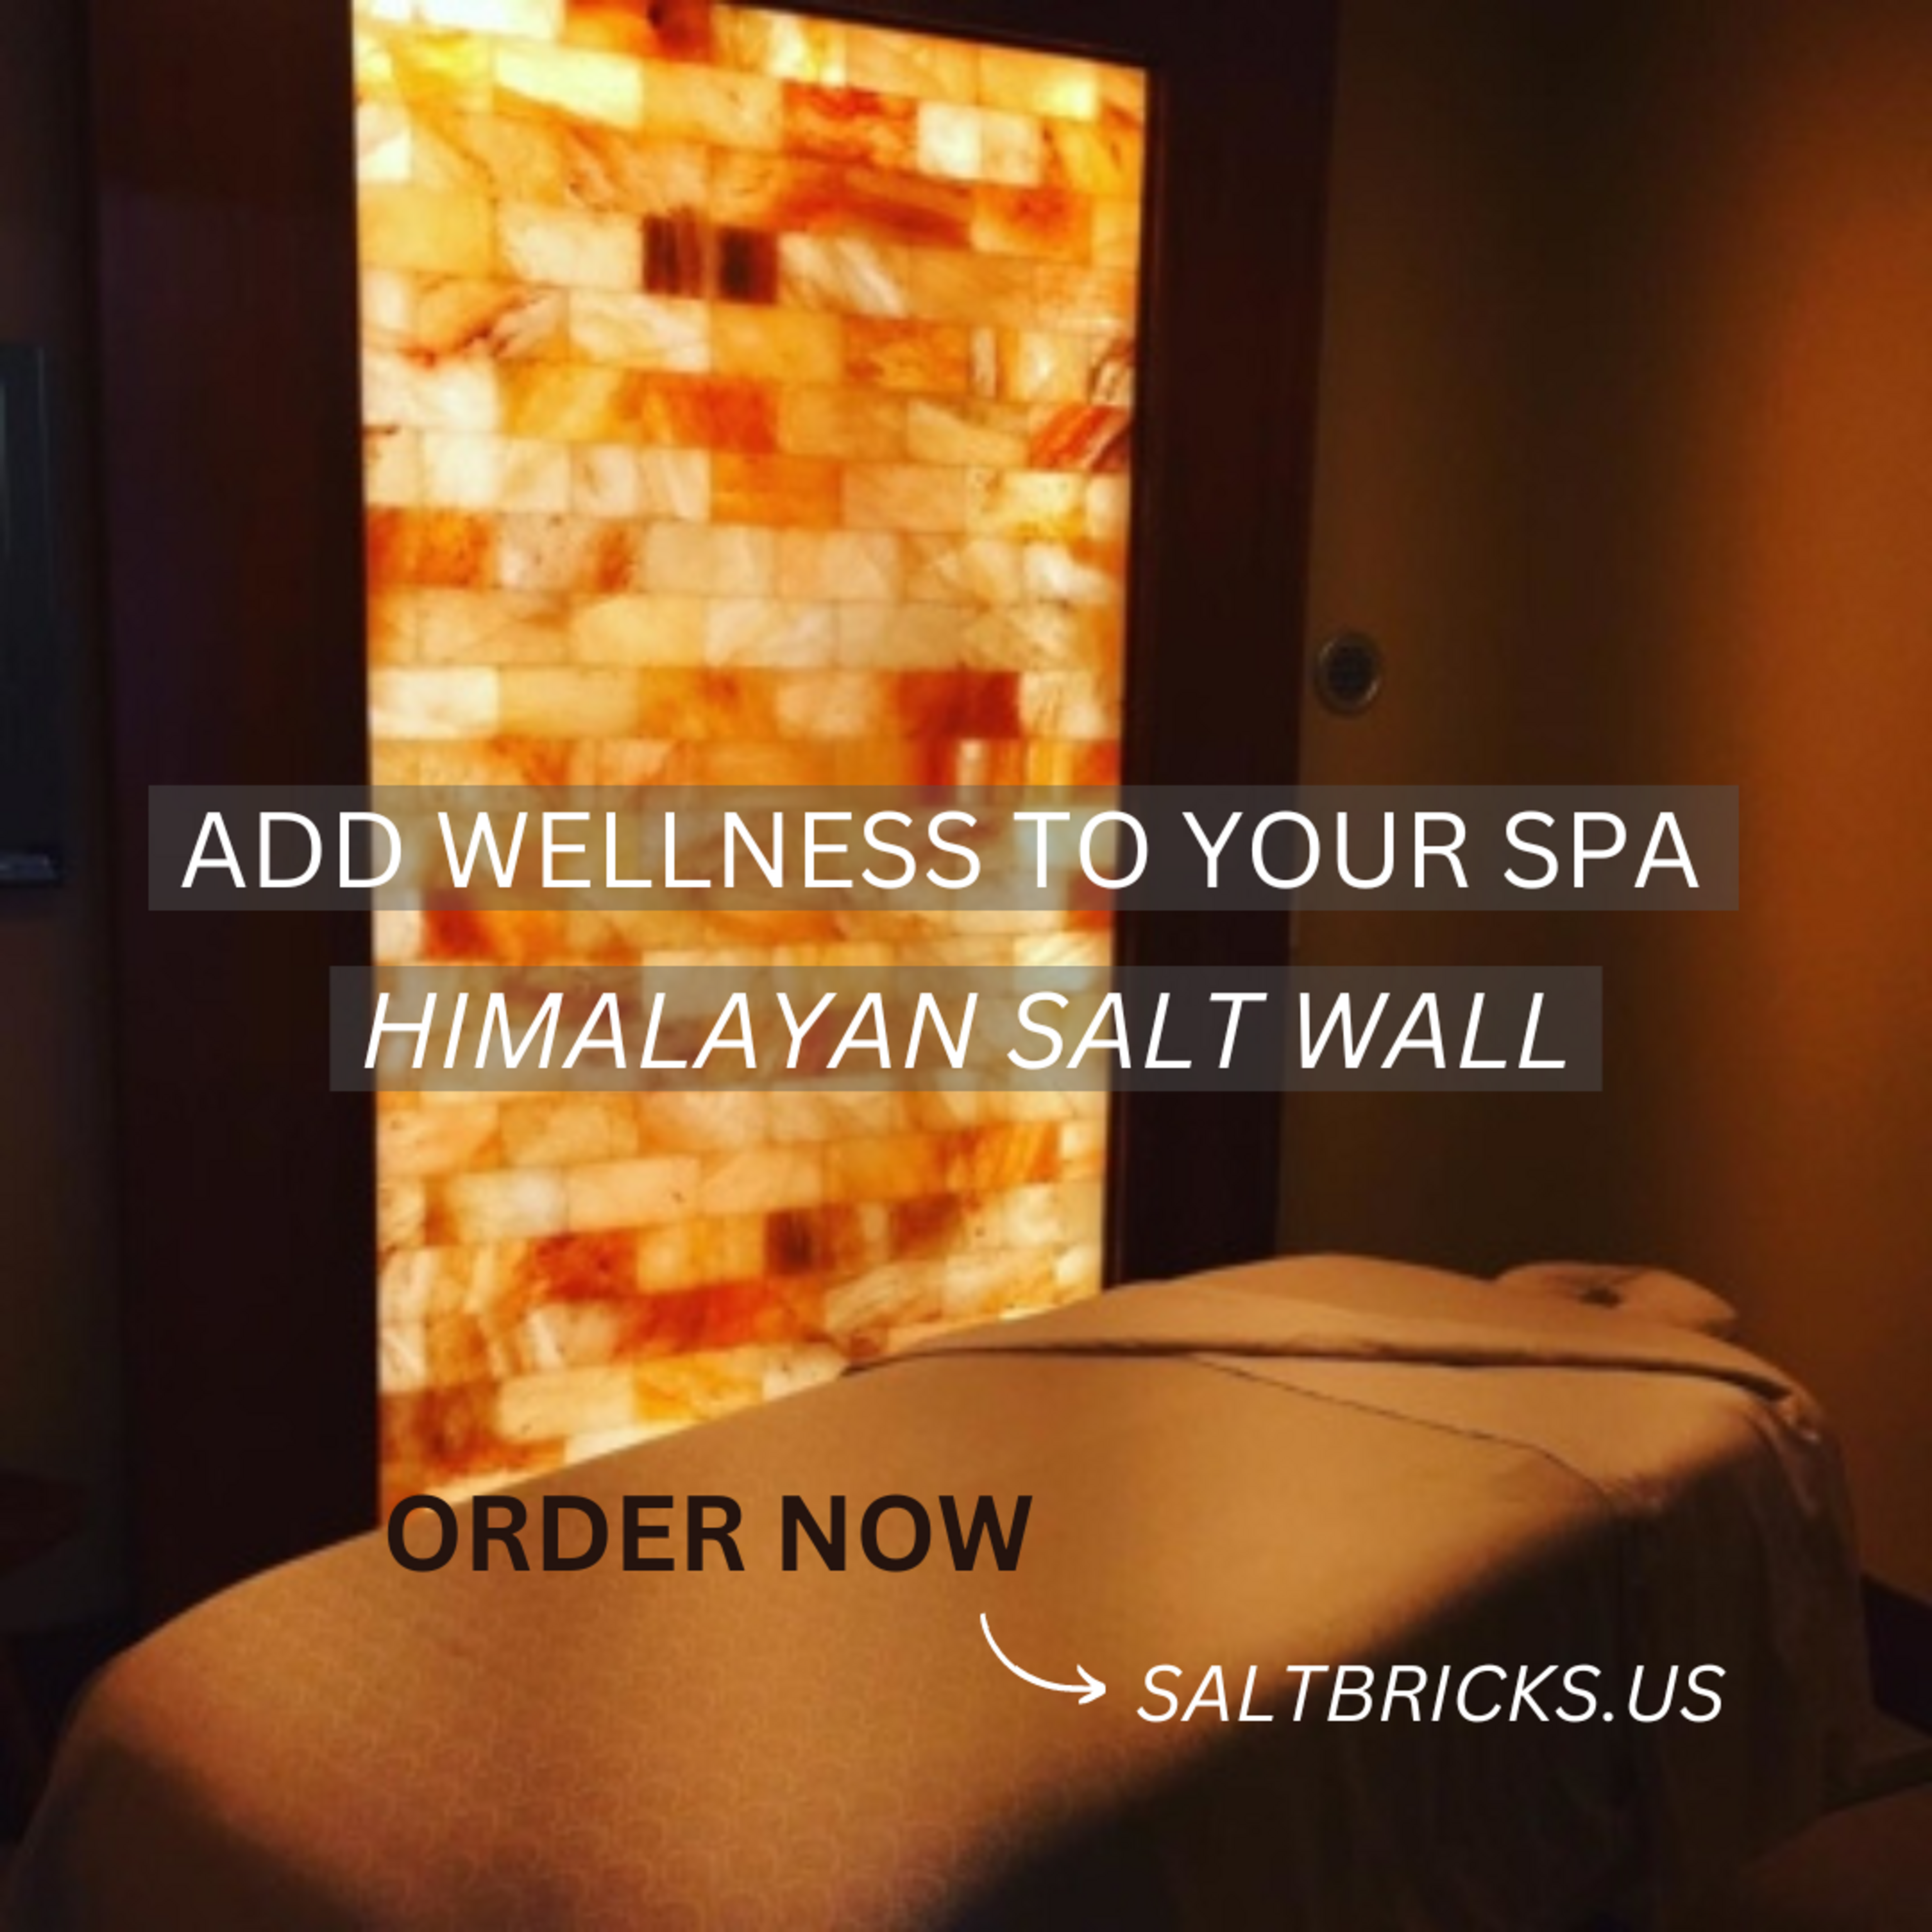 FO YOUR SPA
4 \LT WALL

JR
“a ¥

v

ORDER NOW